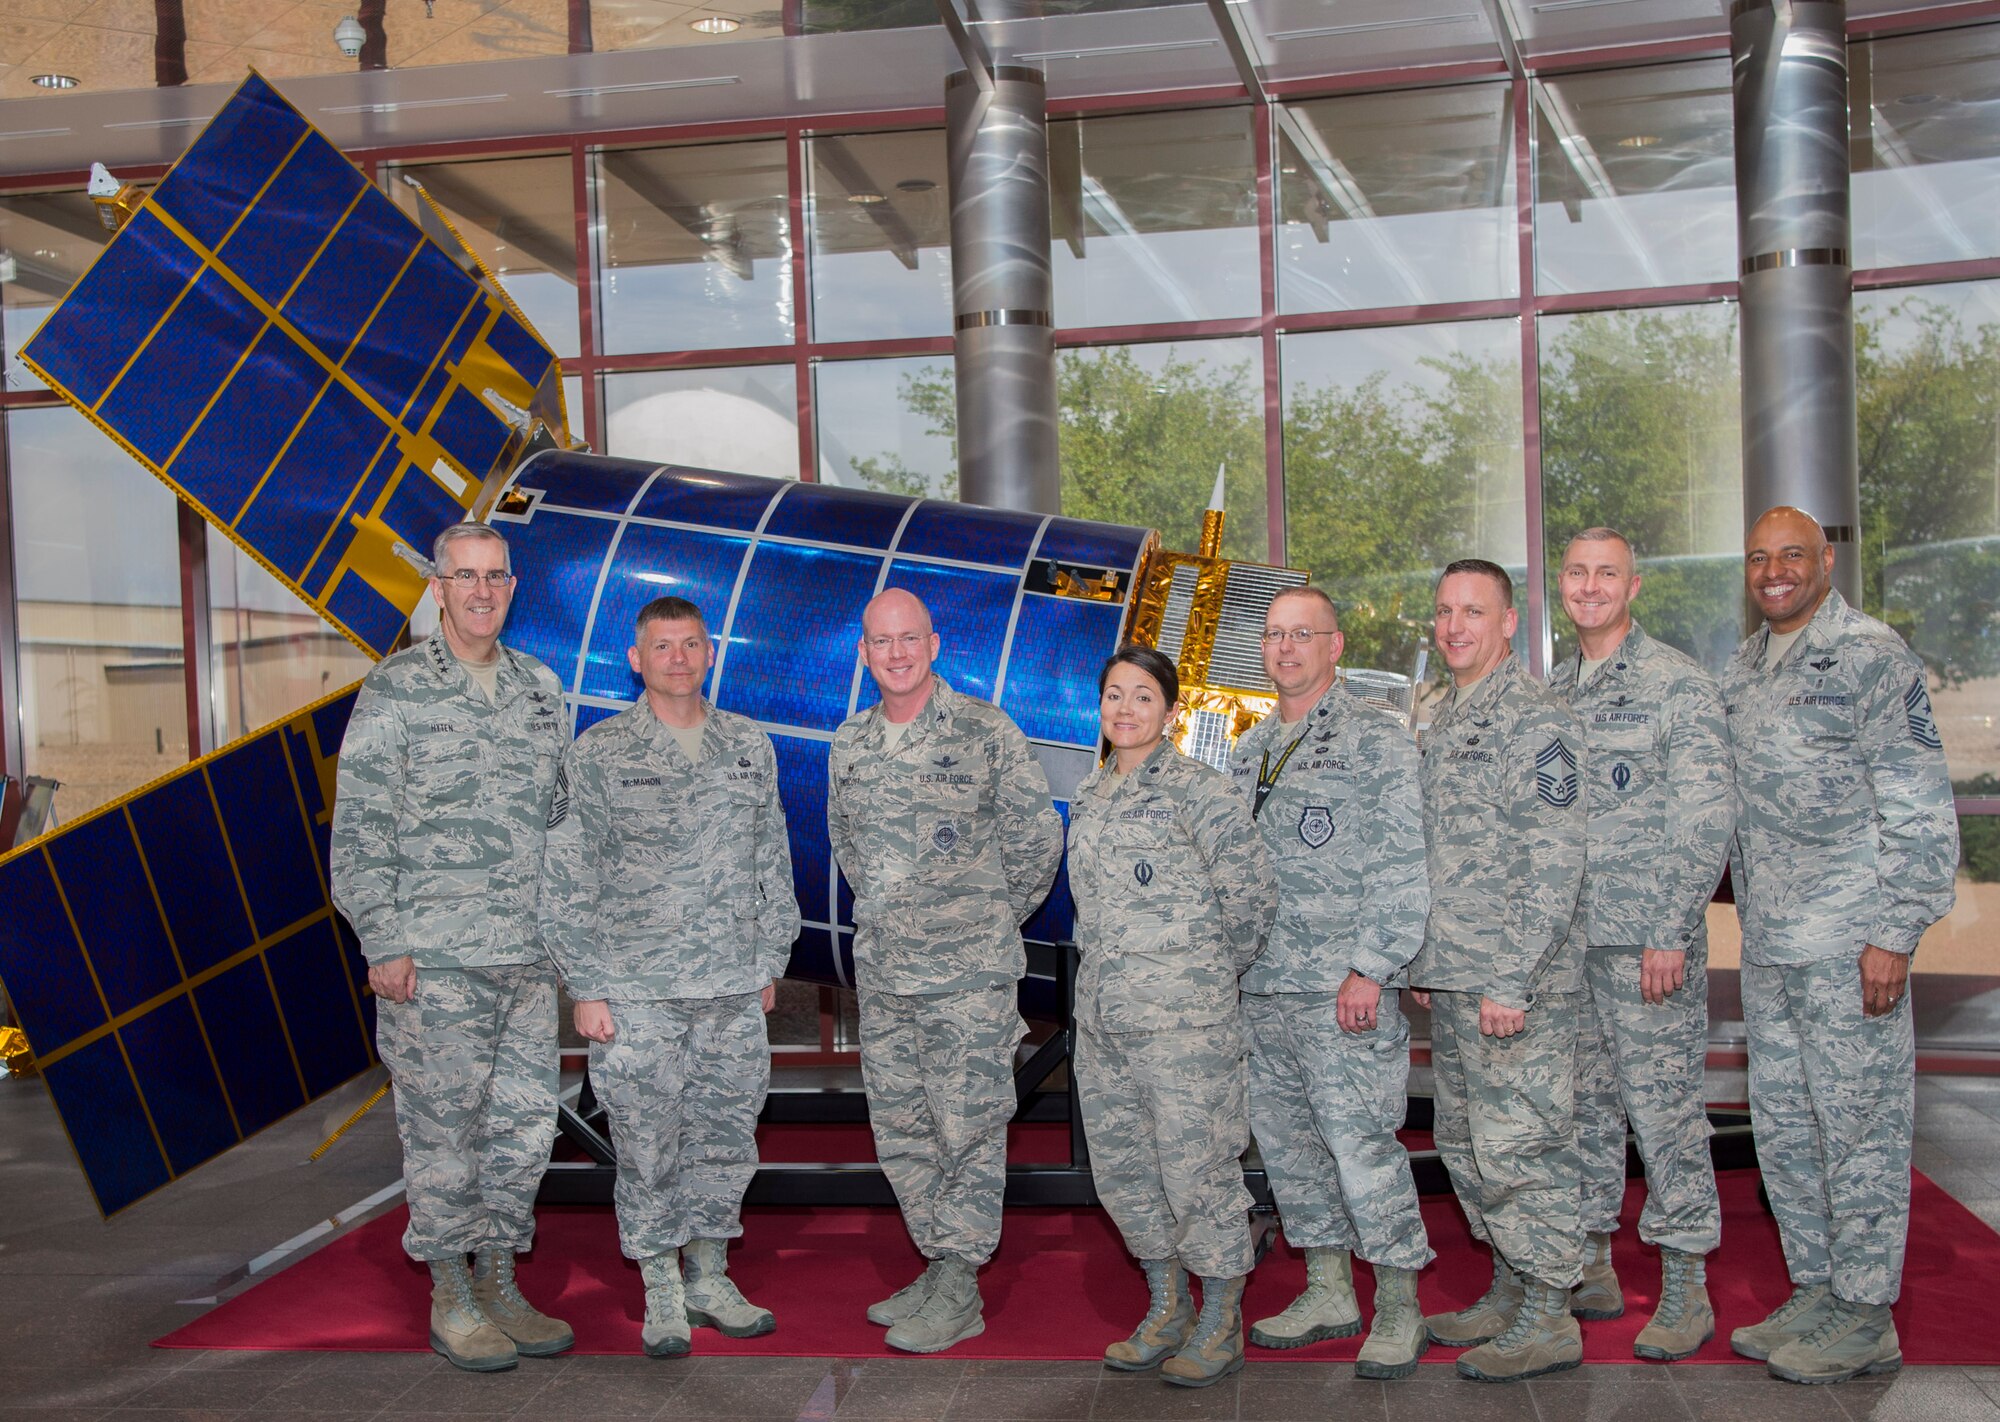 Hyten visited Buckley AFB to recognize and interact with Team Buckley members, who had an outstanding year of performance in 2017. (U.S. Air Force photo by Airman 1st Class Holden S. Faul)